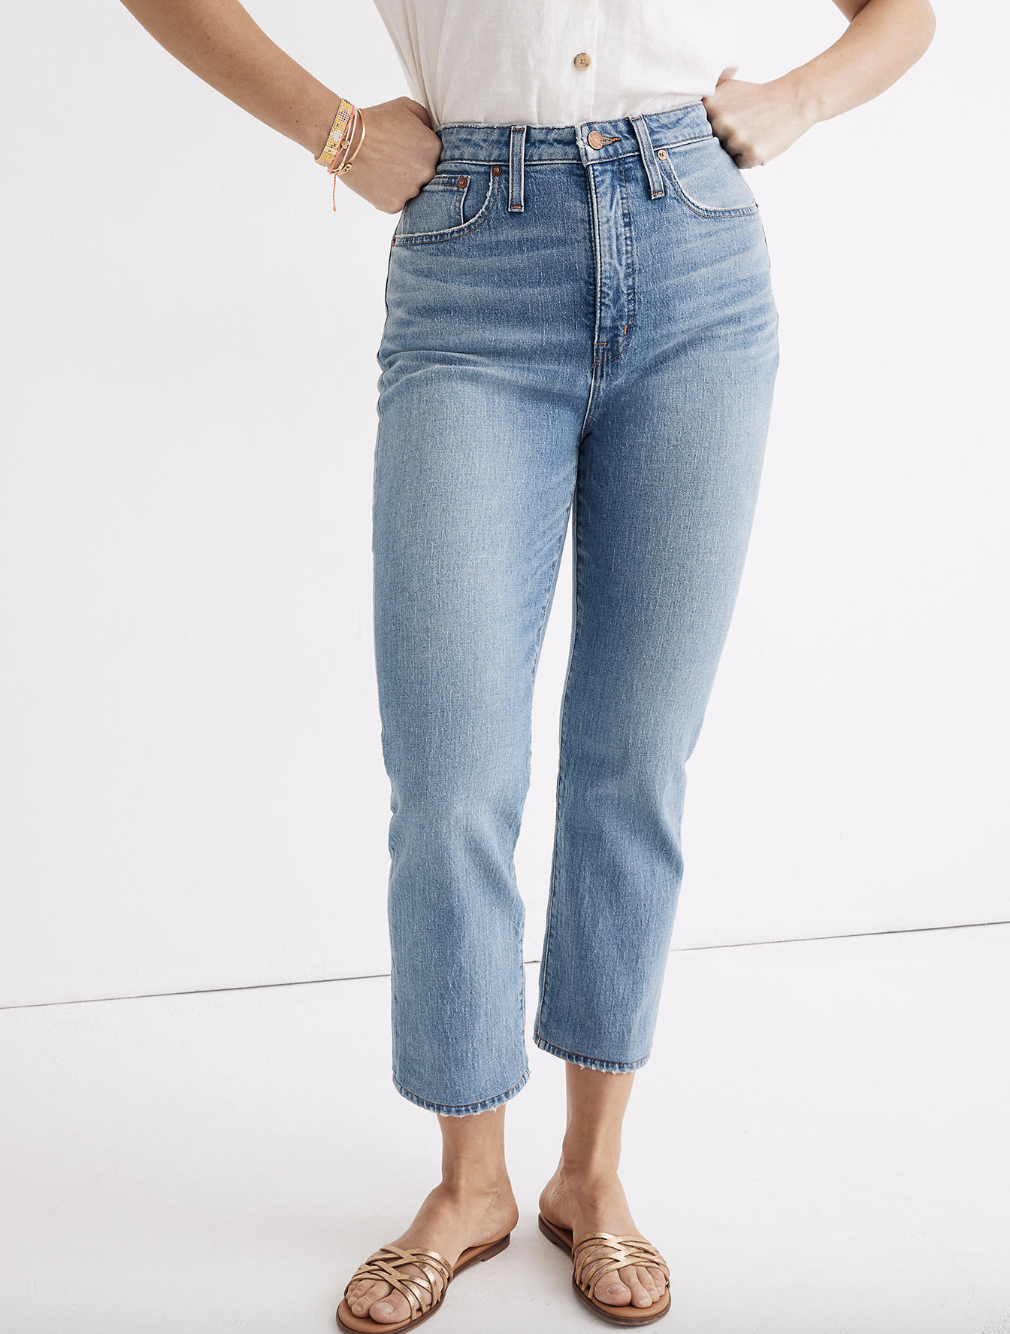 Buy > madewell curvy jeans > in stock